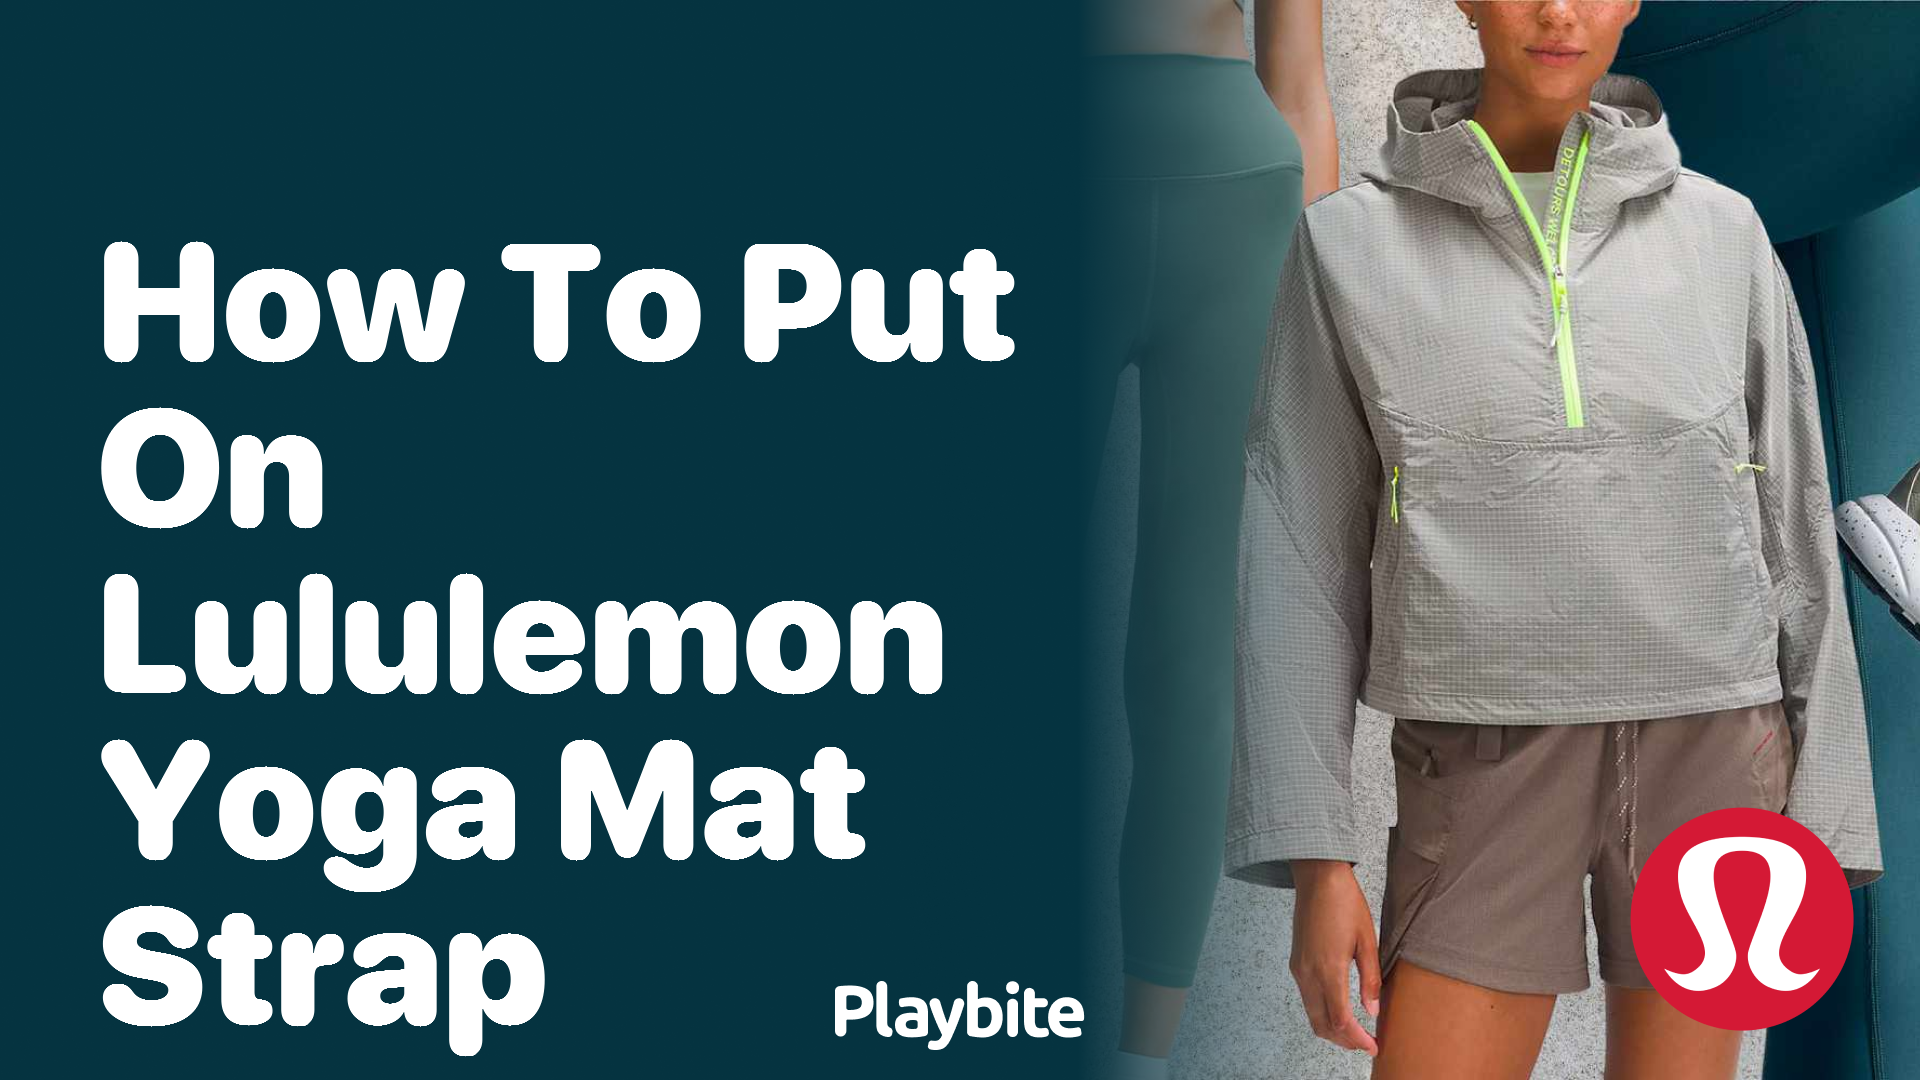 How to Put On a Lululemon Yoga Mat Strap - Playbite